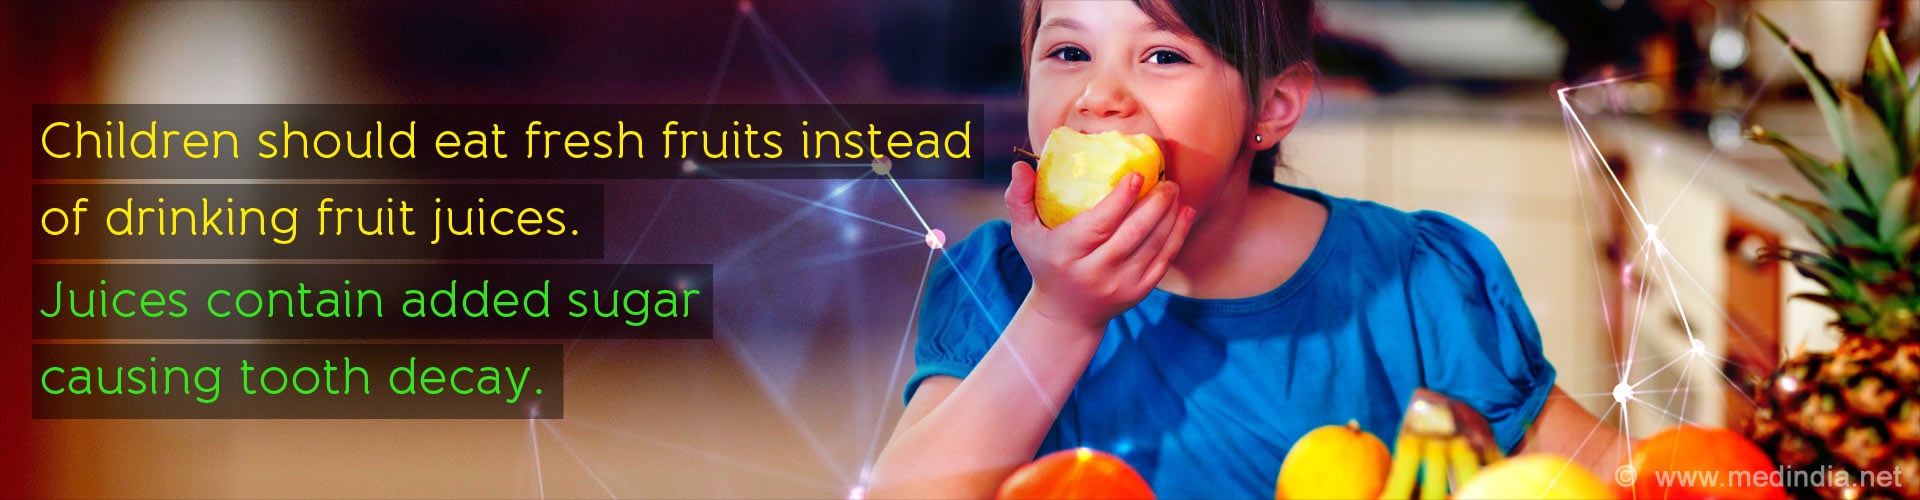 Children should eat fresh fruits instead of drinking fruit juices. Juices contain added sugar causing tooth decay.